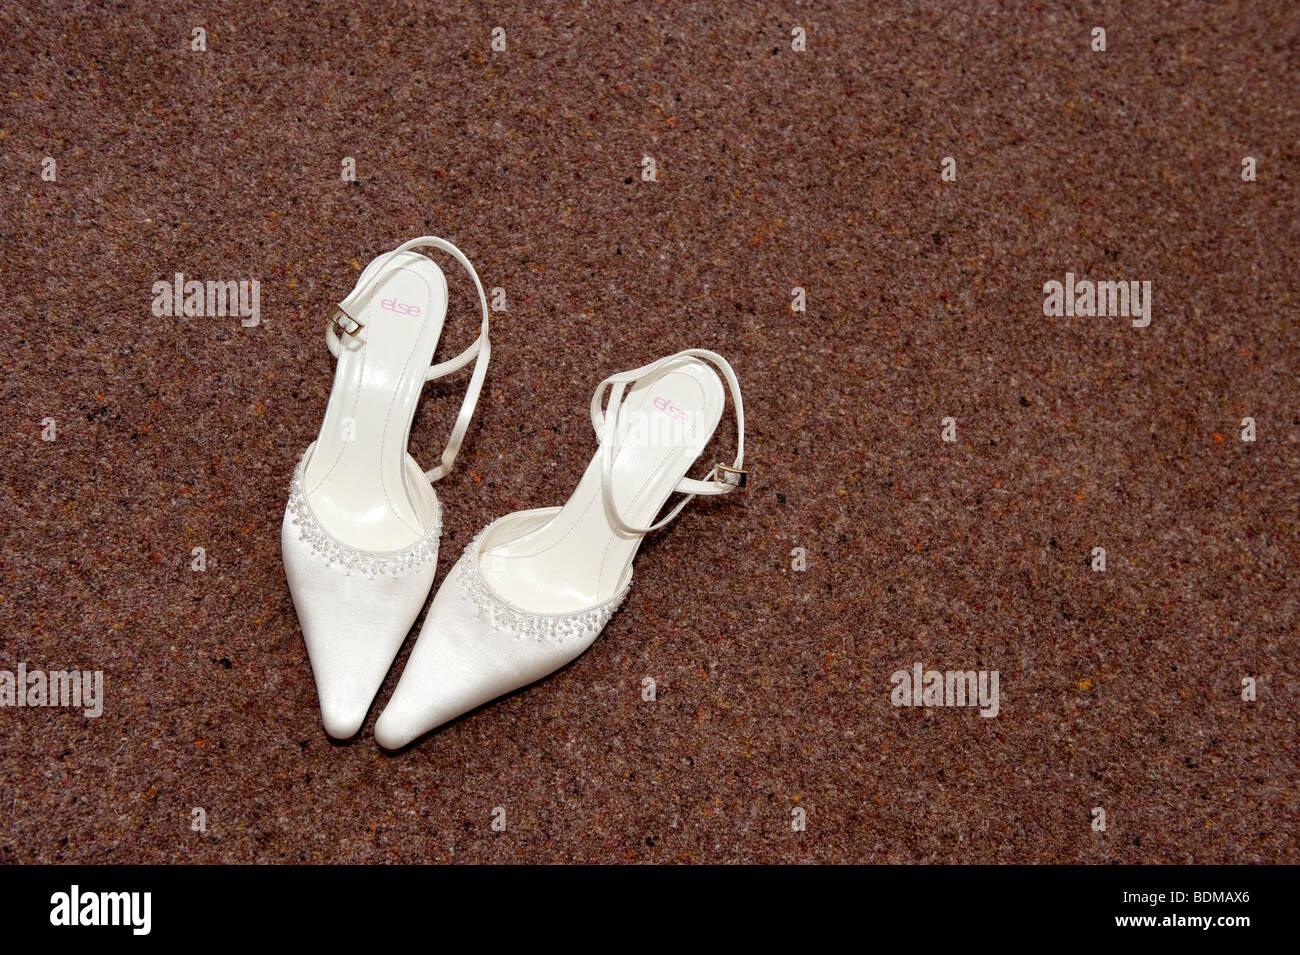 Brides shoes on carpeted floor Stock Photo